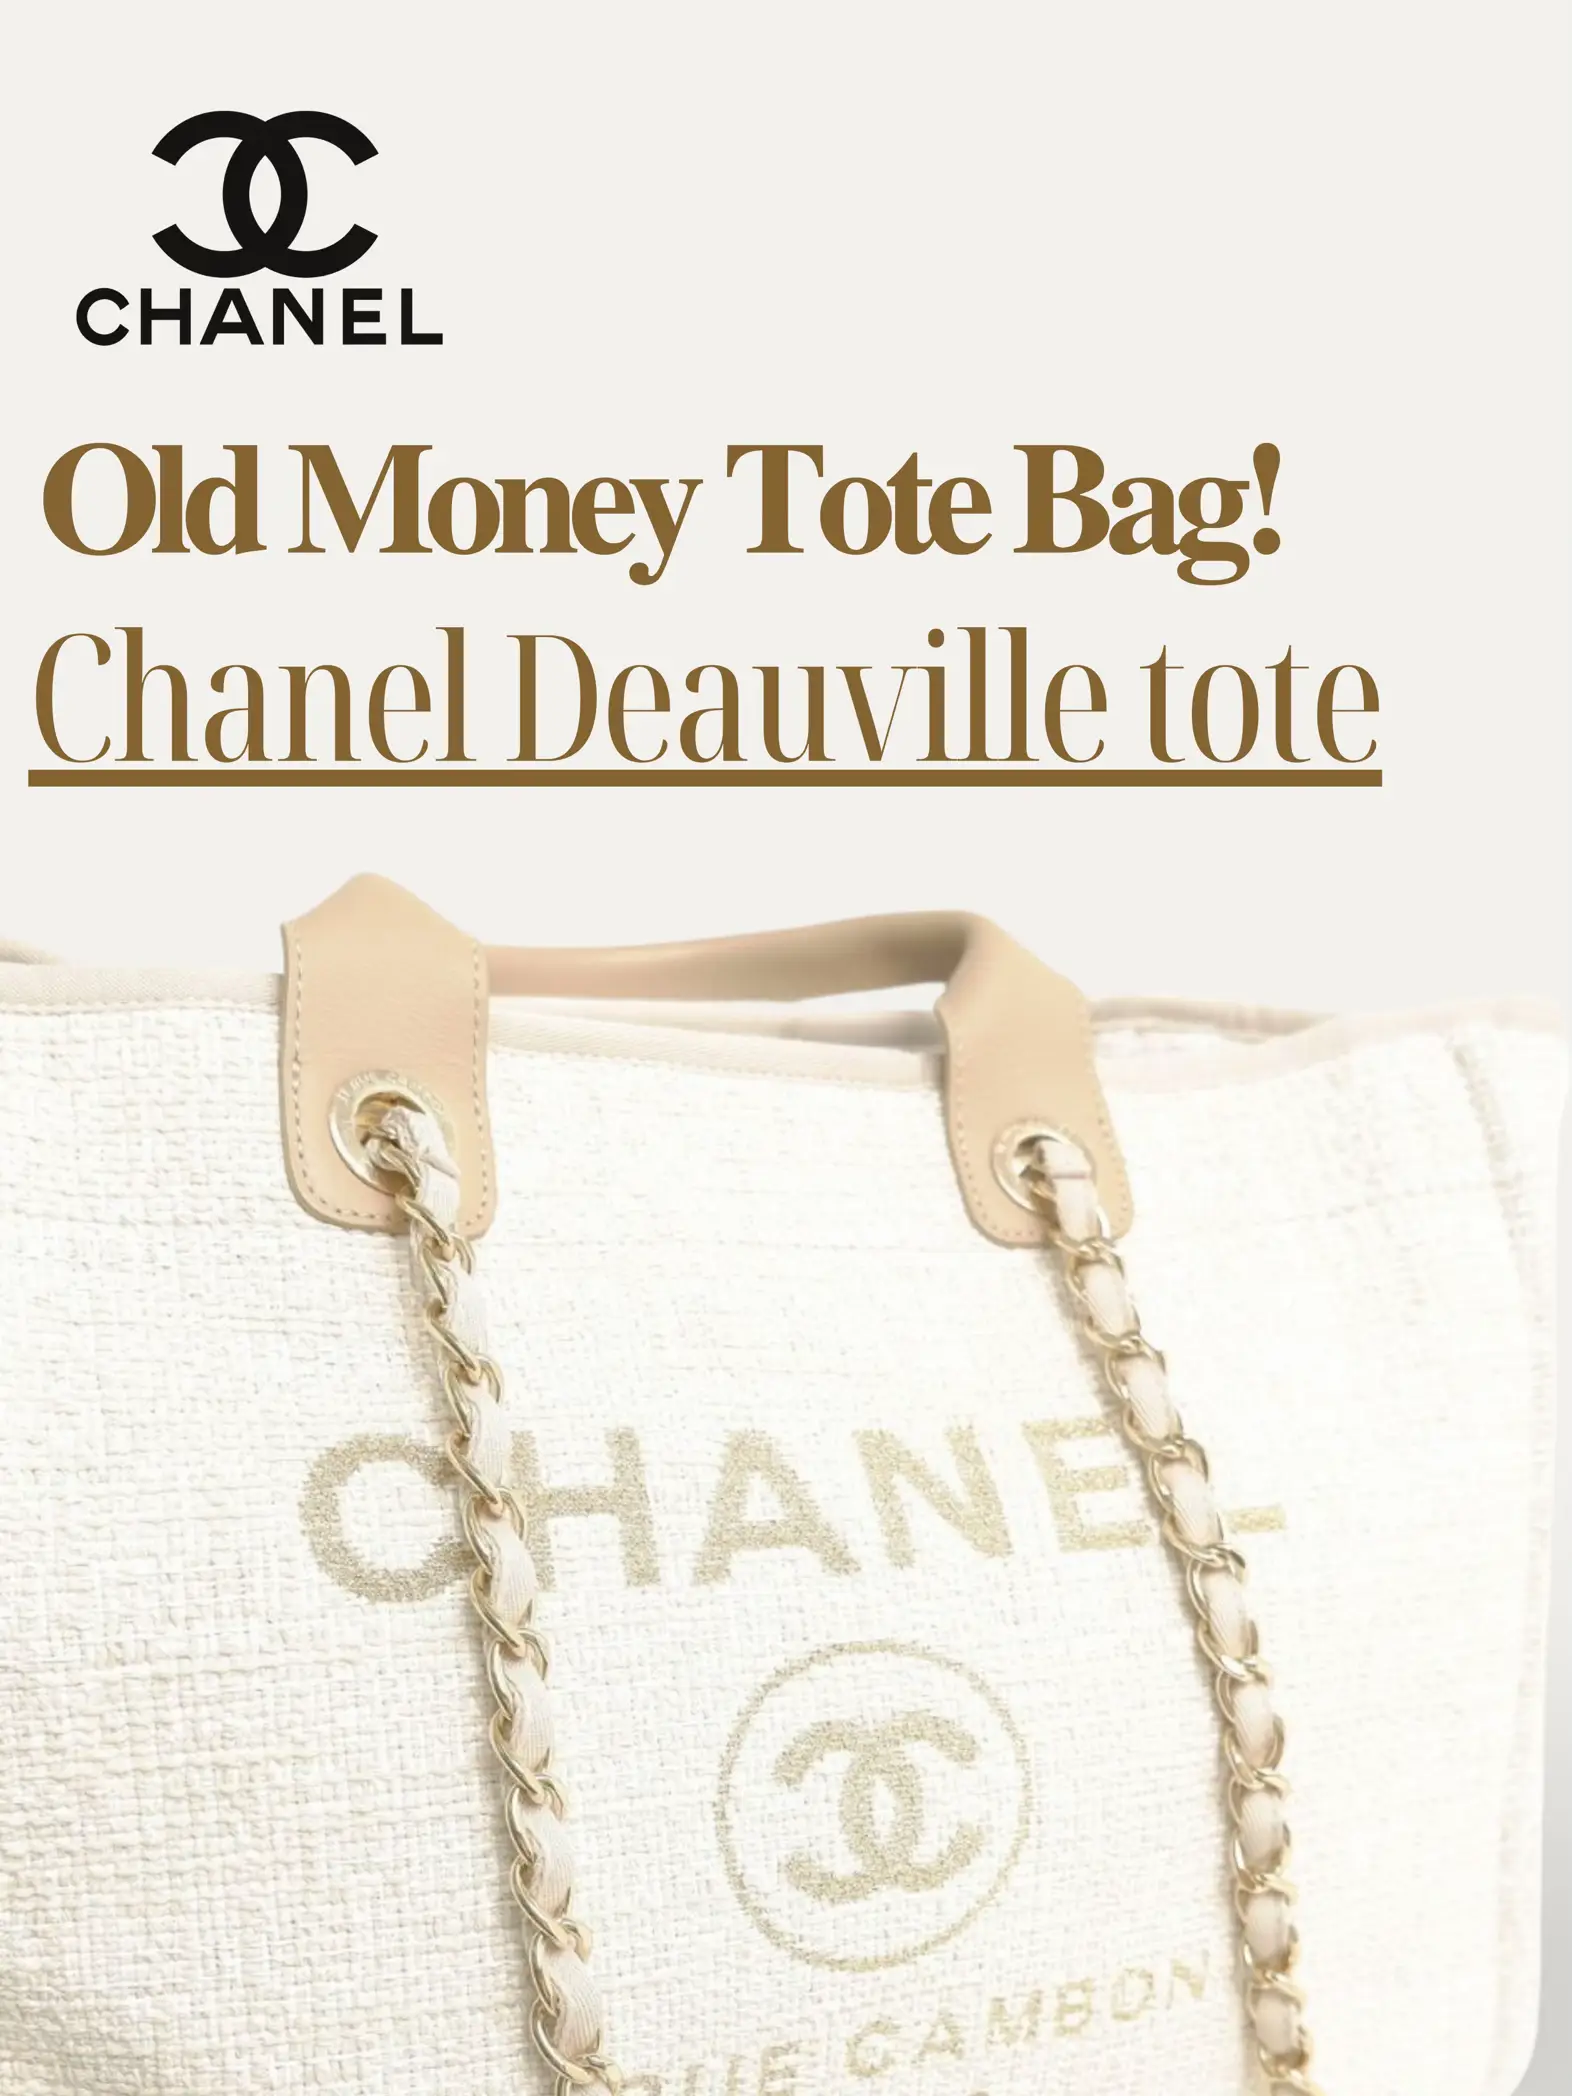 Old Money Tote Bag?, Gallery posted by Natasshanjani